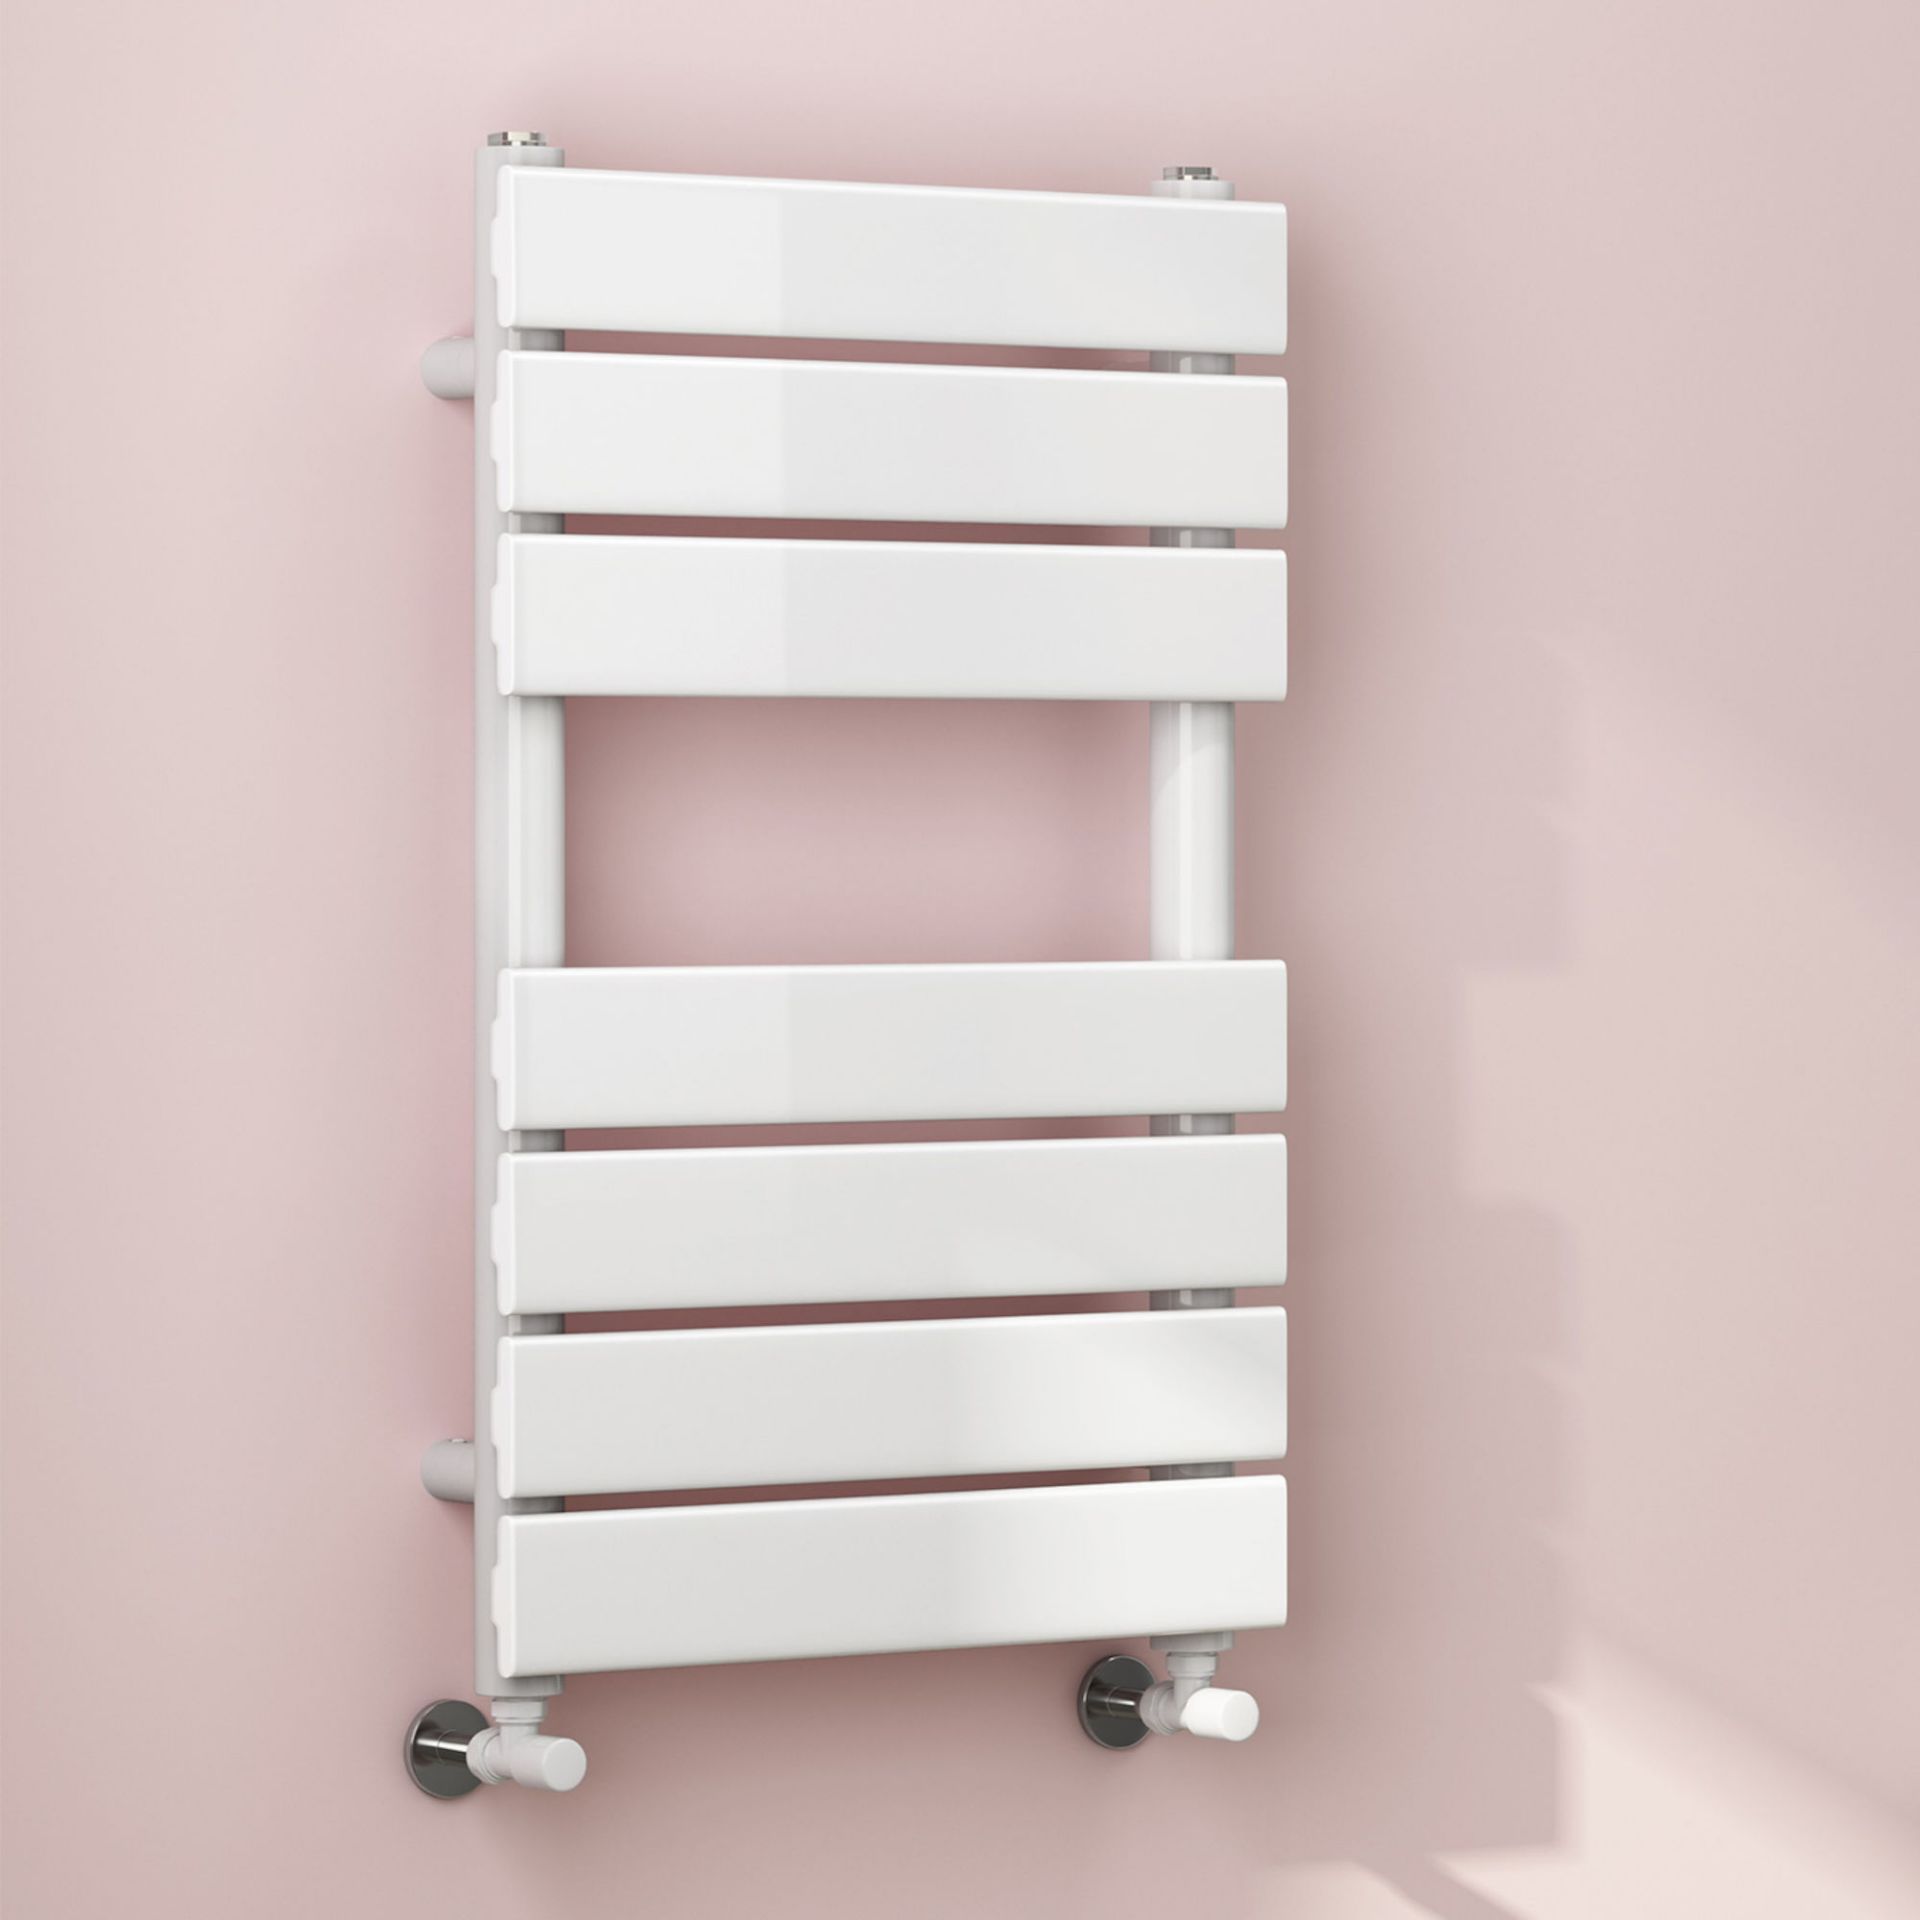 (TP16) 650x400mm White Flat Panel Ladder Towel Radiator. Made from low carbon steel with a high